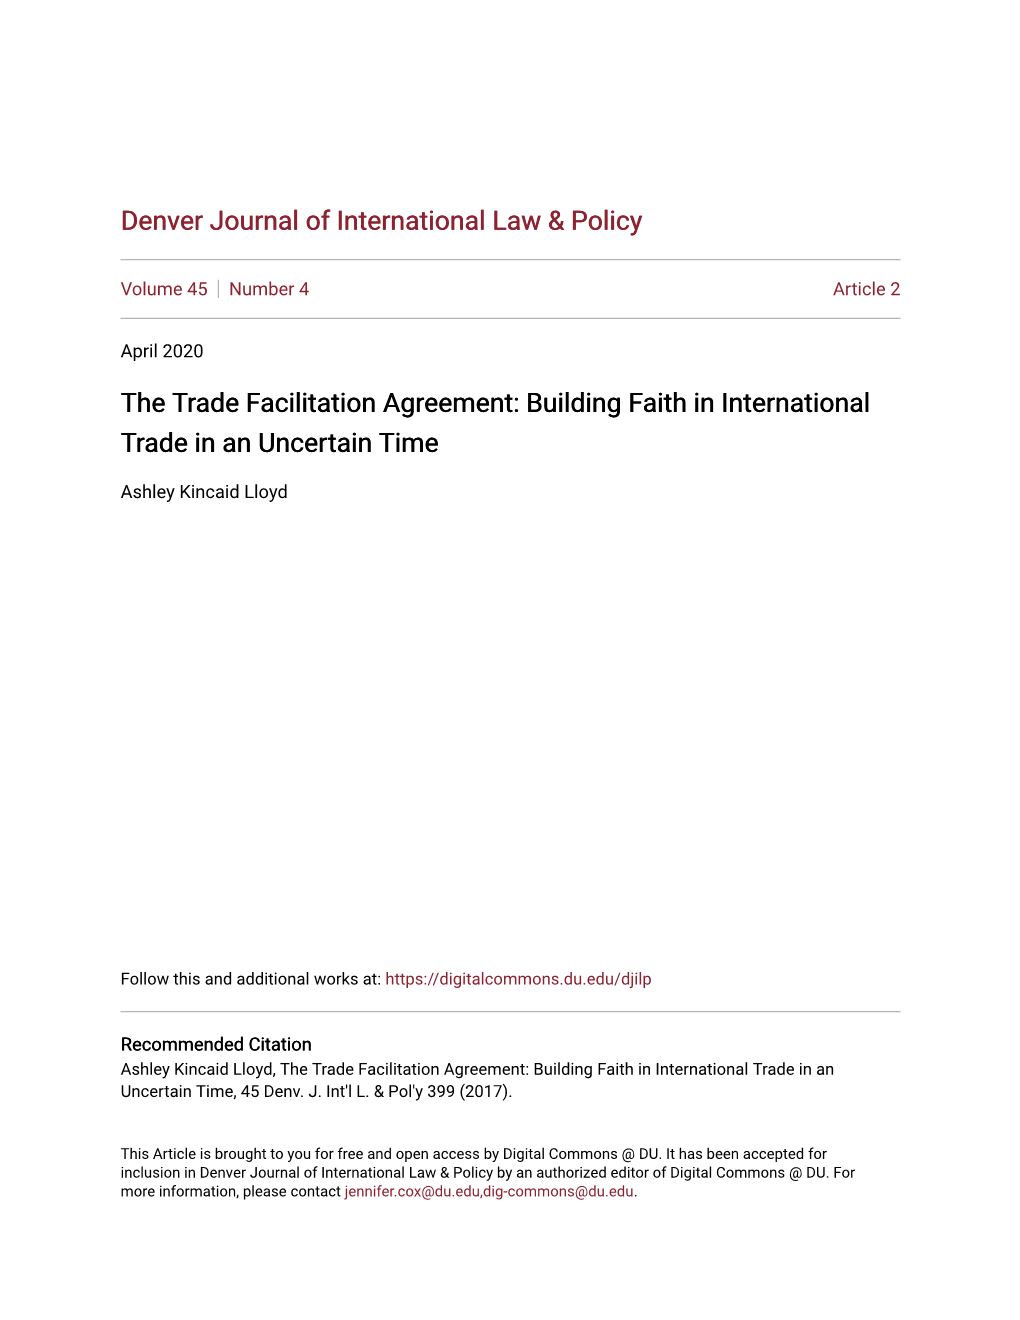 The Trade Facilitation Agreement: Building Faith in International Trade in an Uncertain Time